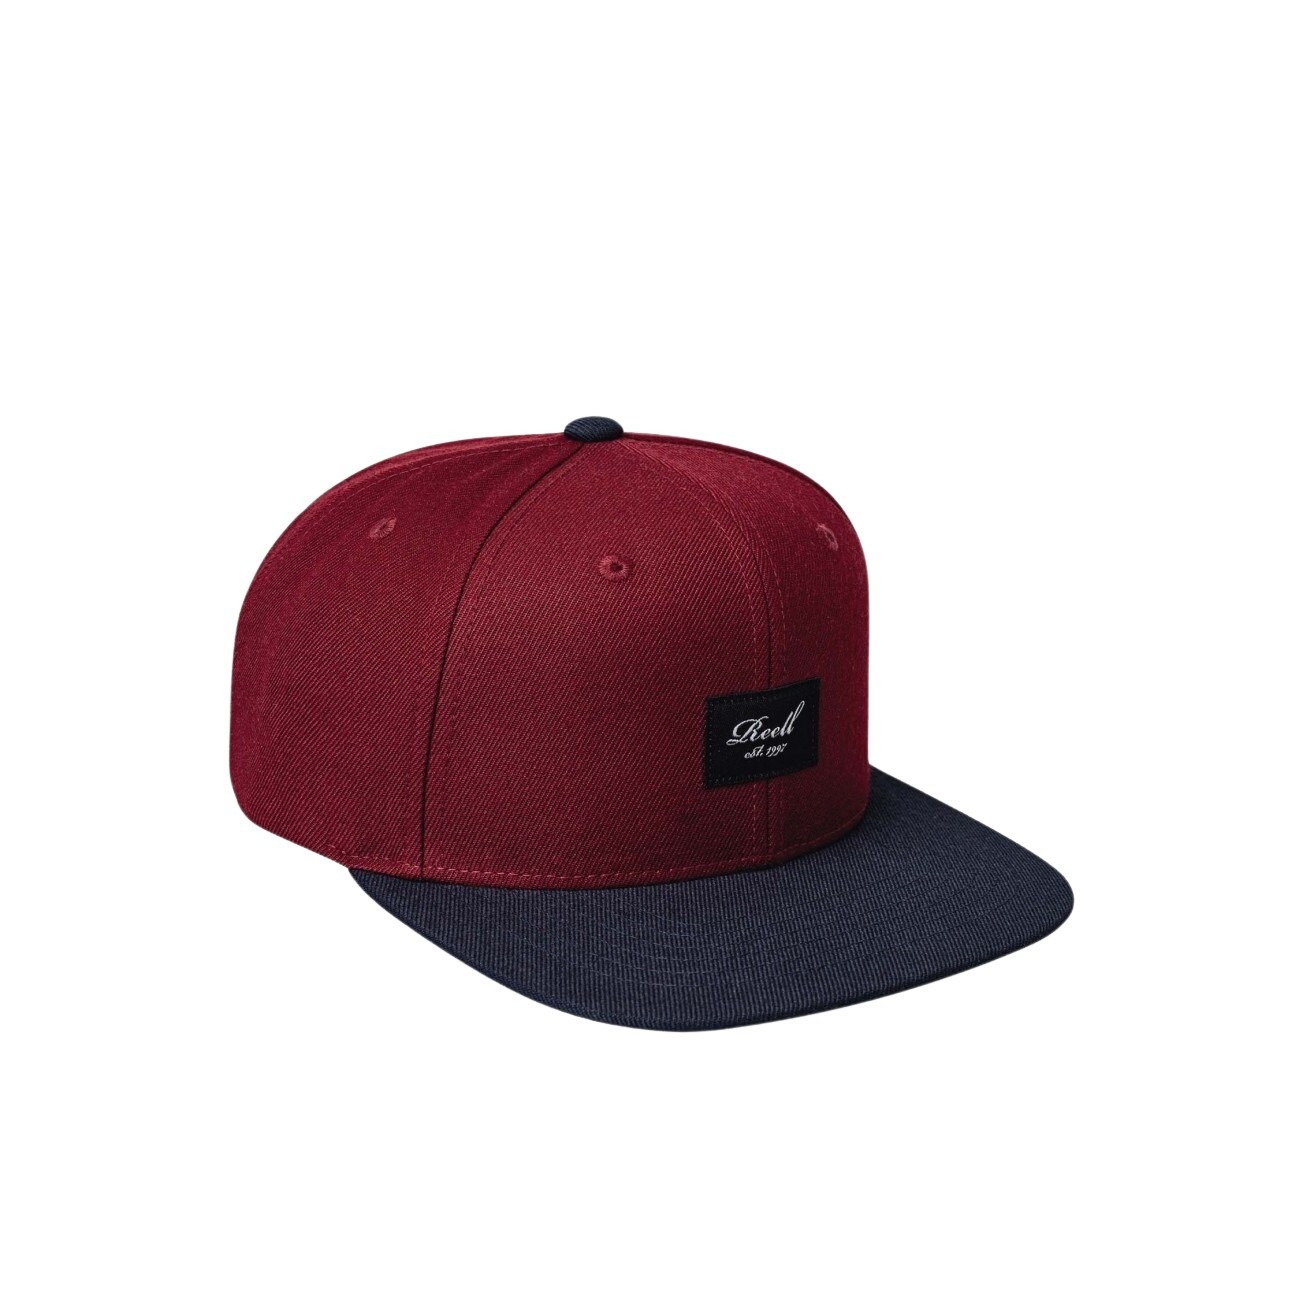 casquette reell pitchout